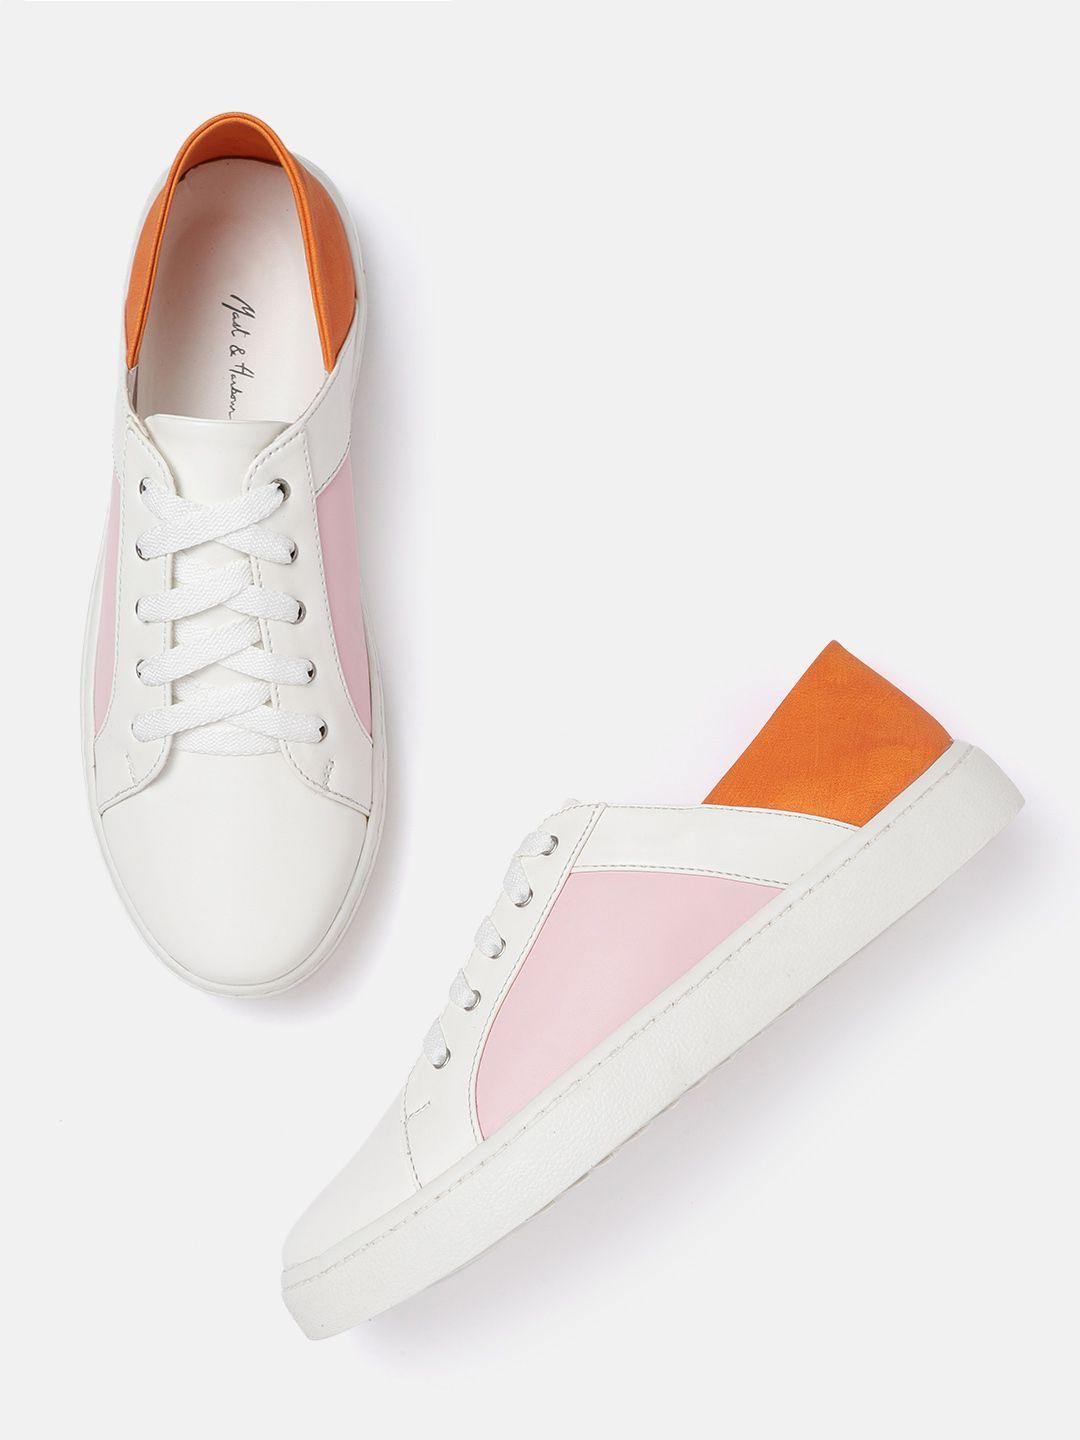 mast & harbour women white & pink colourblocked sneakers